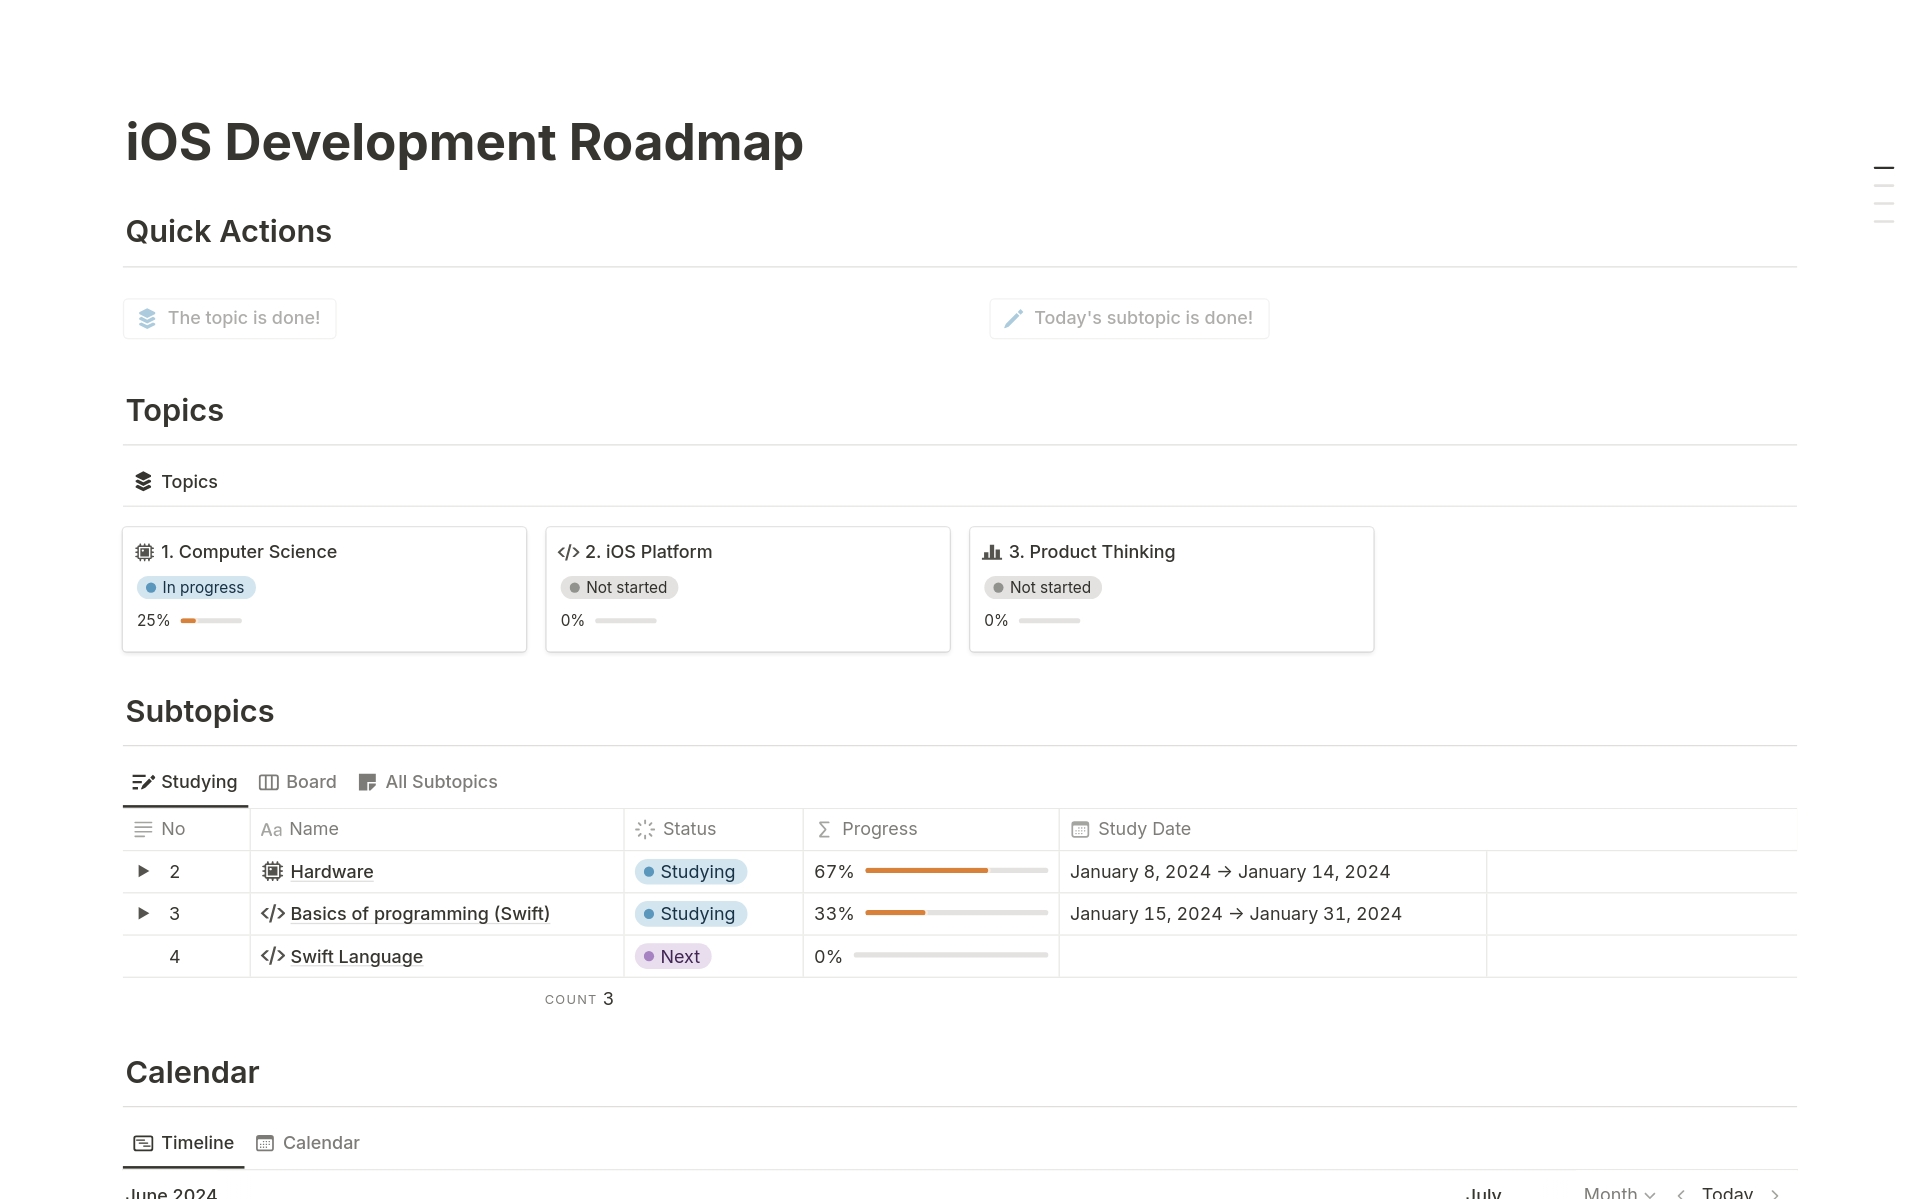 The iOS Development Roadmap lays out the path to mastery, 39 essential steps to transform you from code cadet to app artisan.

Conquer computer science, the iOS platform, and product thinking - this roadmap is your guide to shipping remarkable apps.